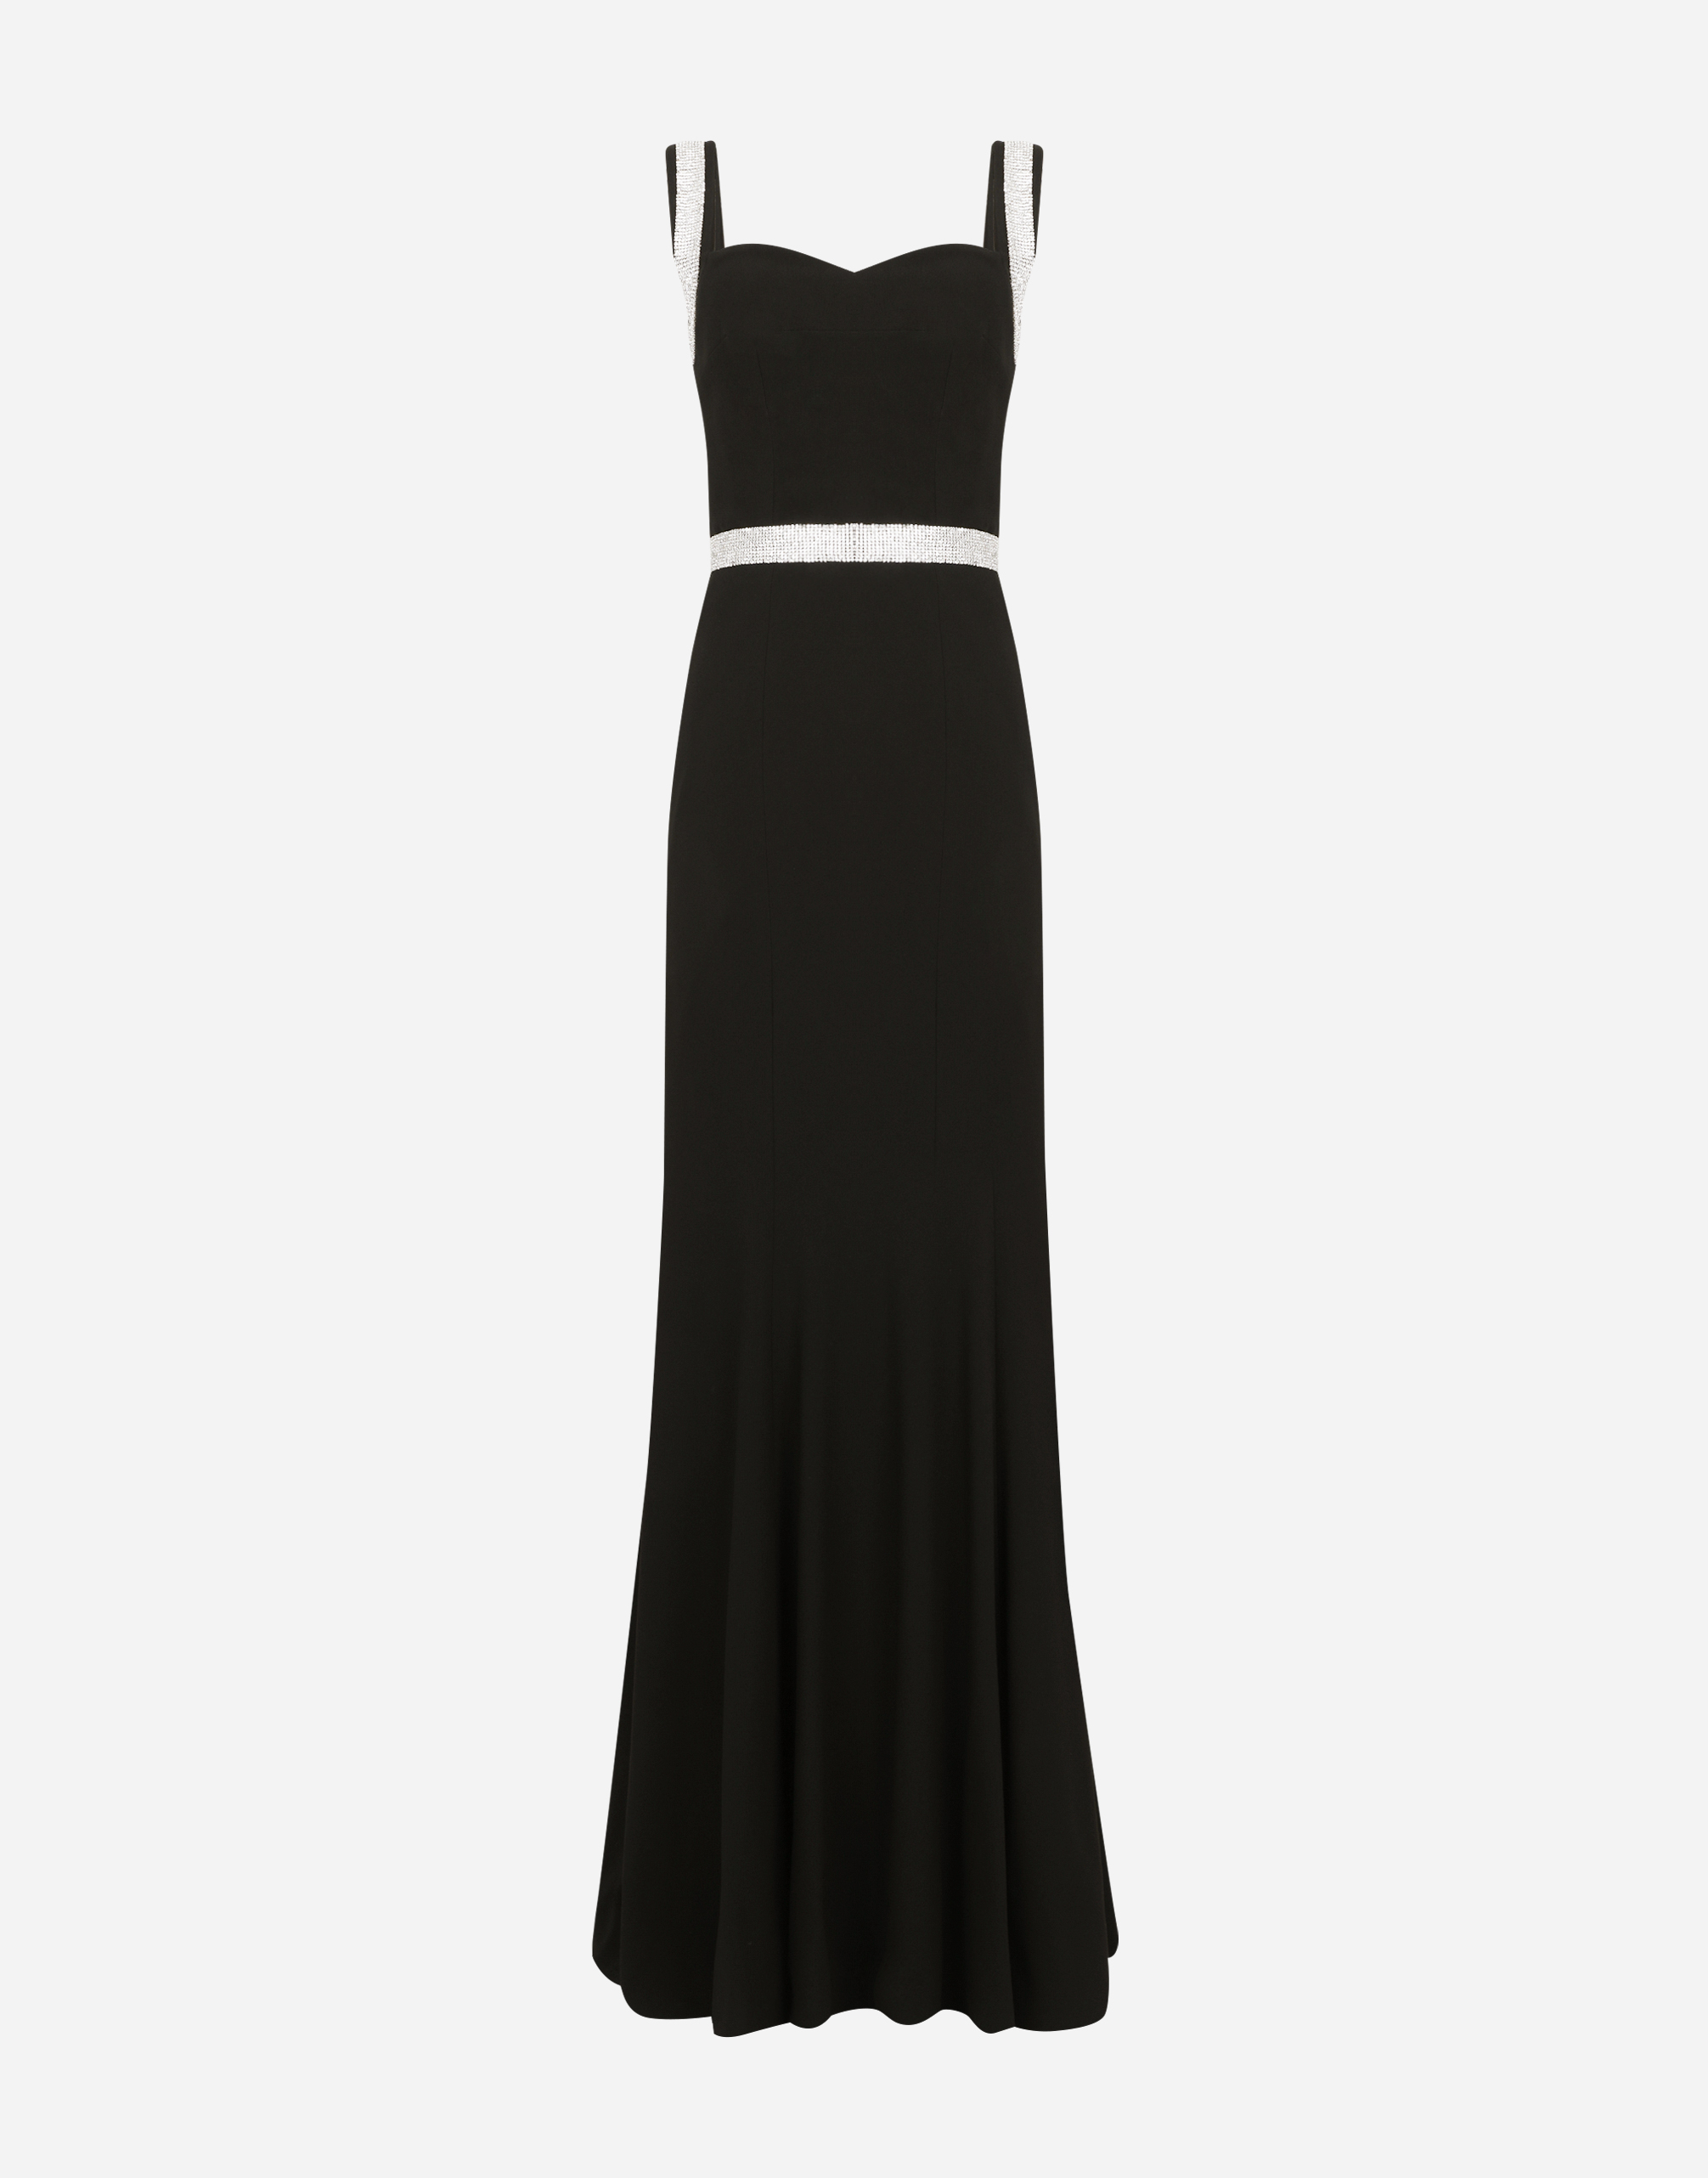 Long cady dress with rhinestone details in Black